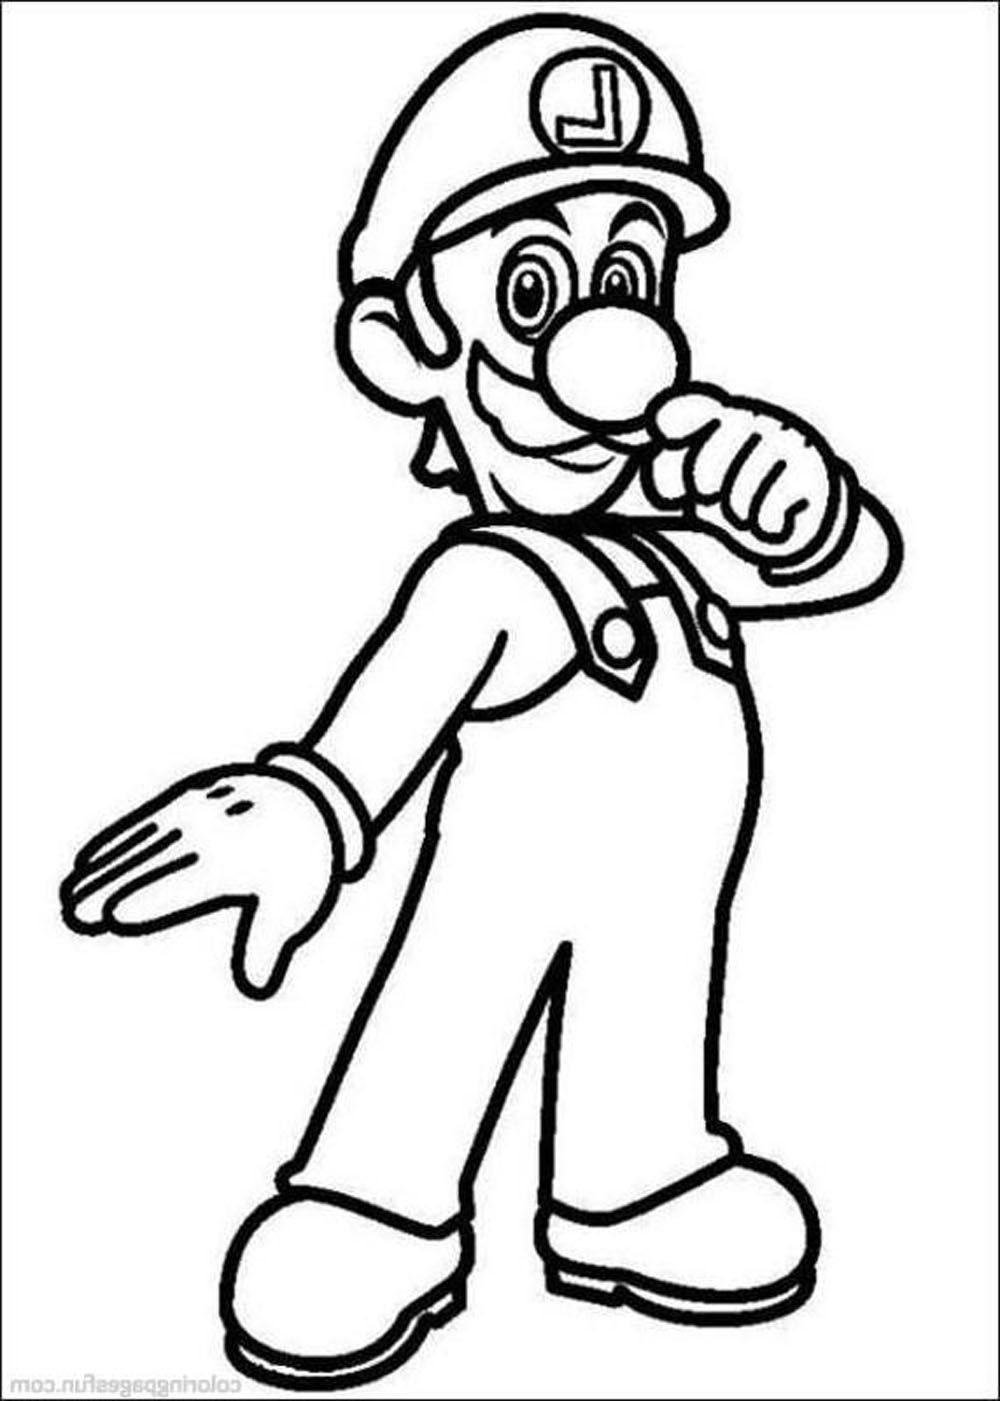 baby luigi pictures baby luigi coloring pages at getcoloringscom free luigi baby pictures 